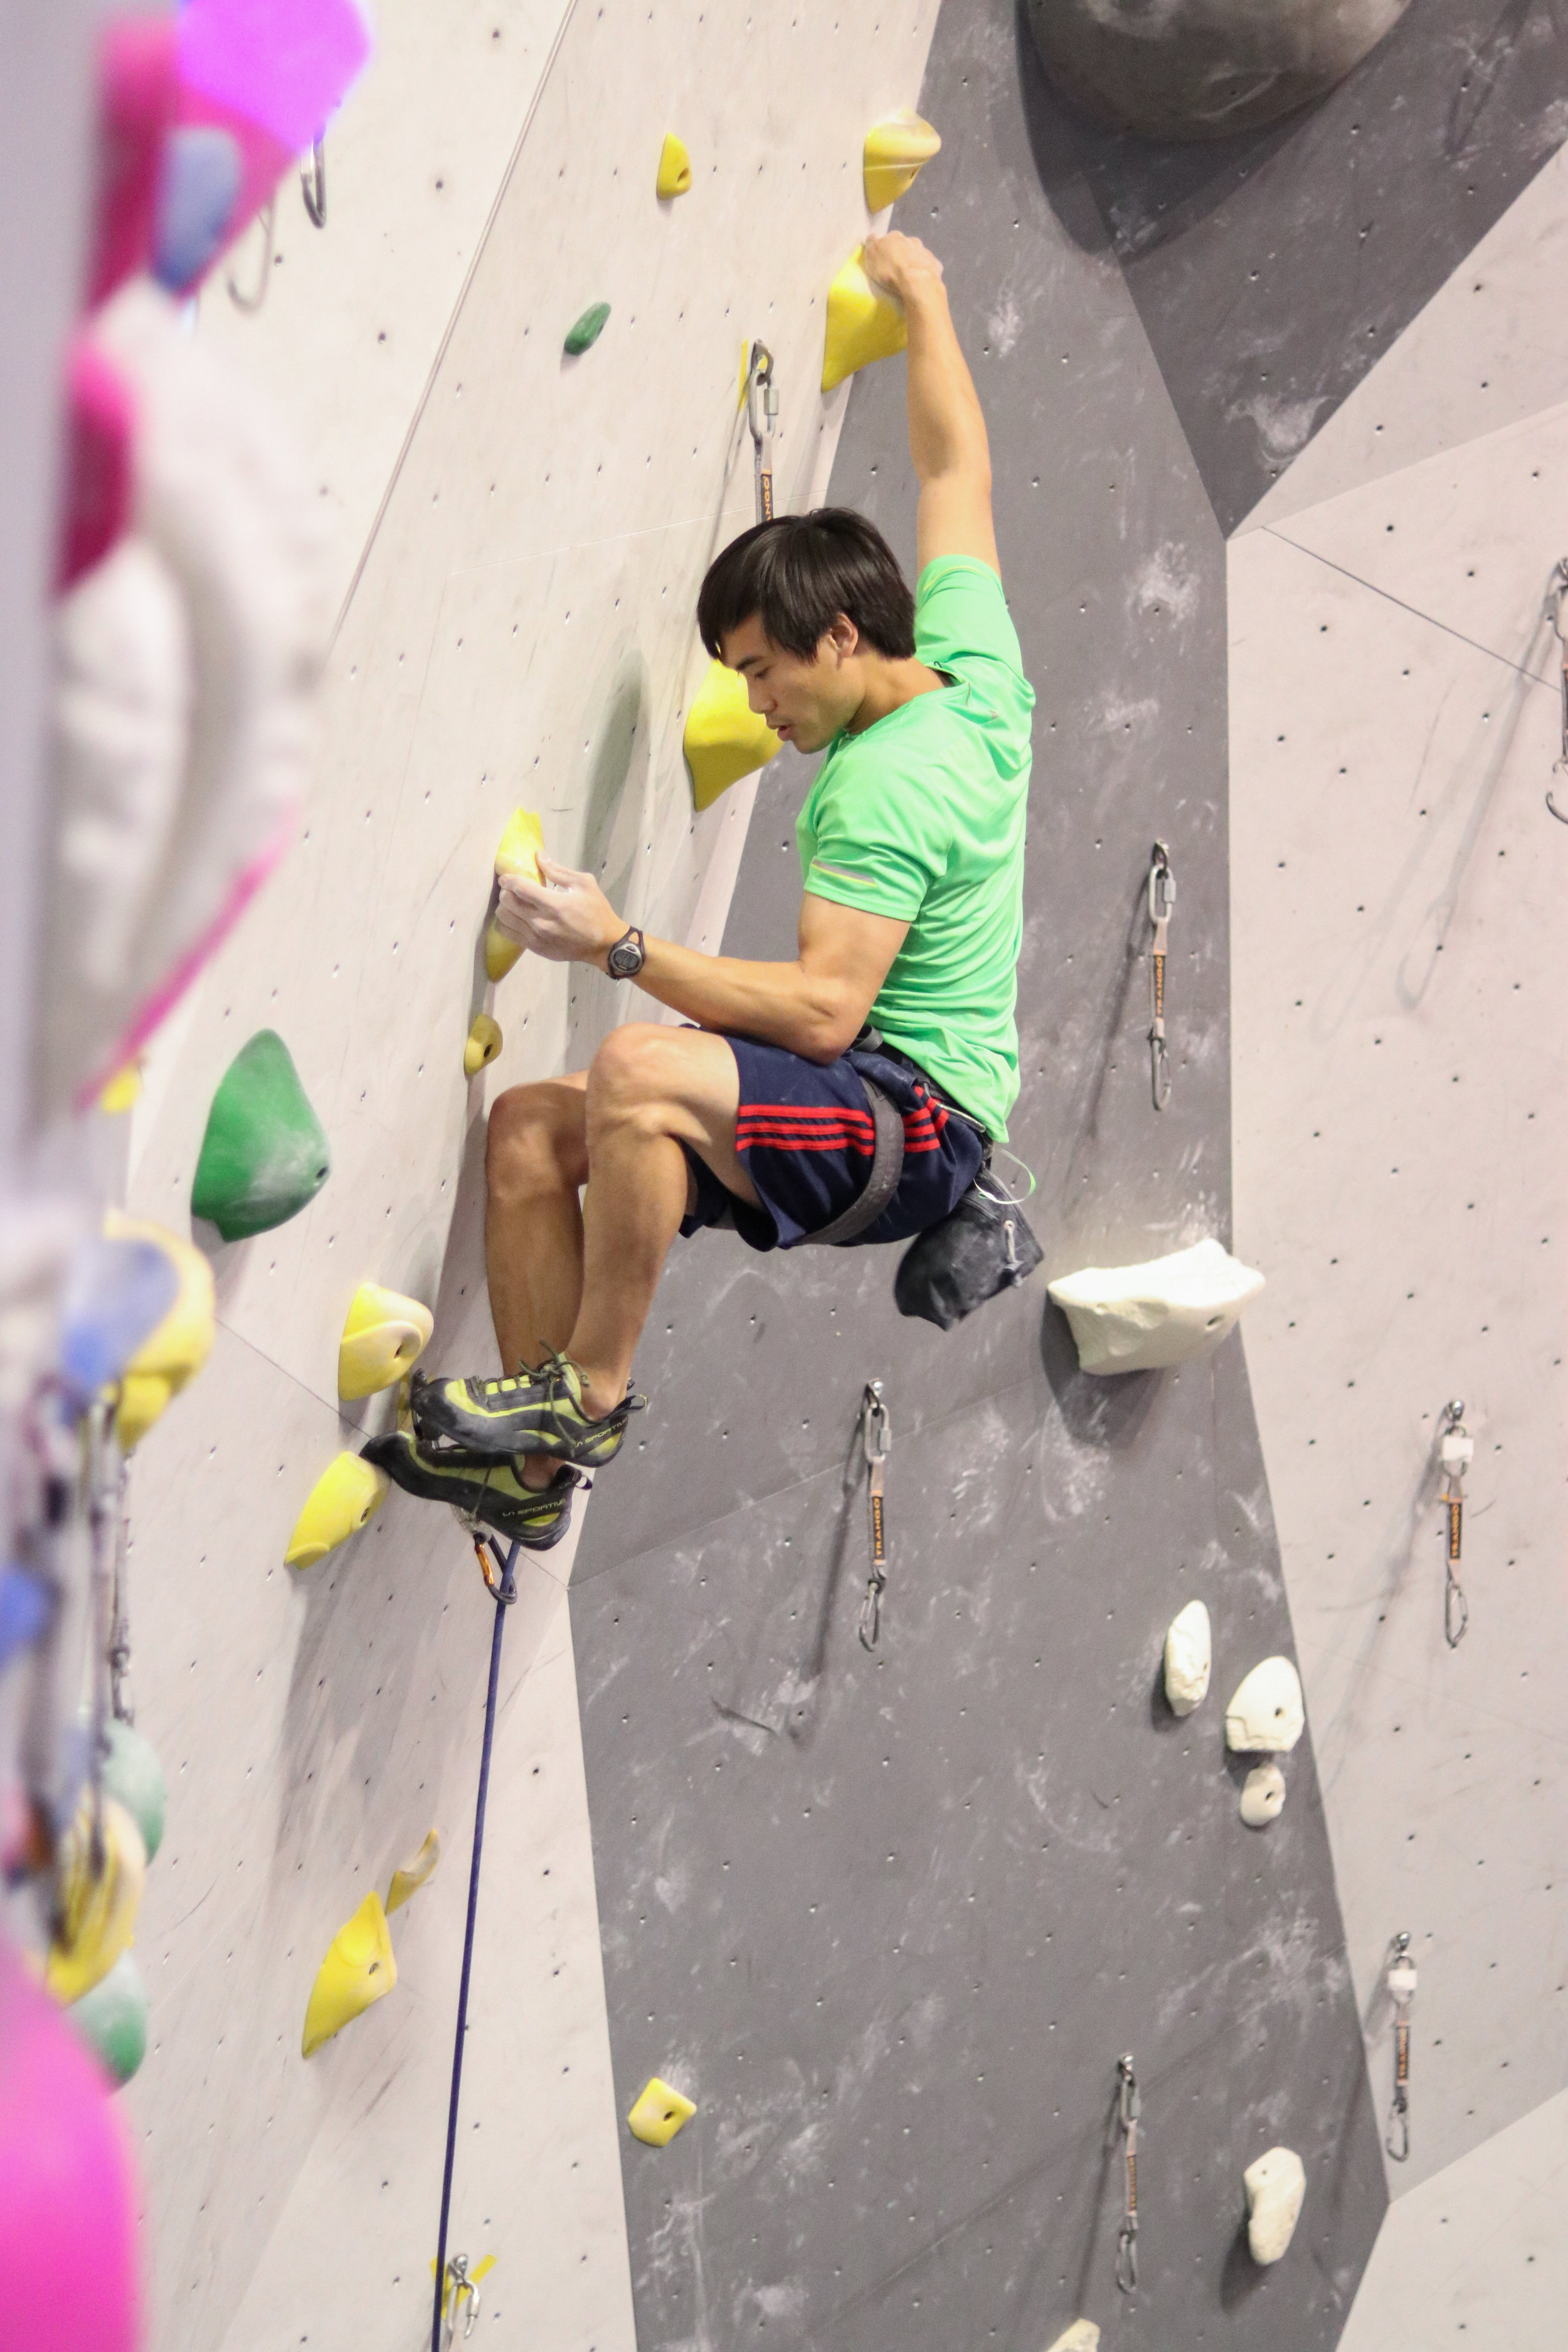 High-Kick-Photography-Vertical-Ventures-St-Pete-Florida-Indoor-Rock-Climbing-Competition-Active-Sports-Lifestyle-LR-7.jpg